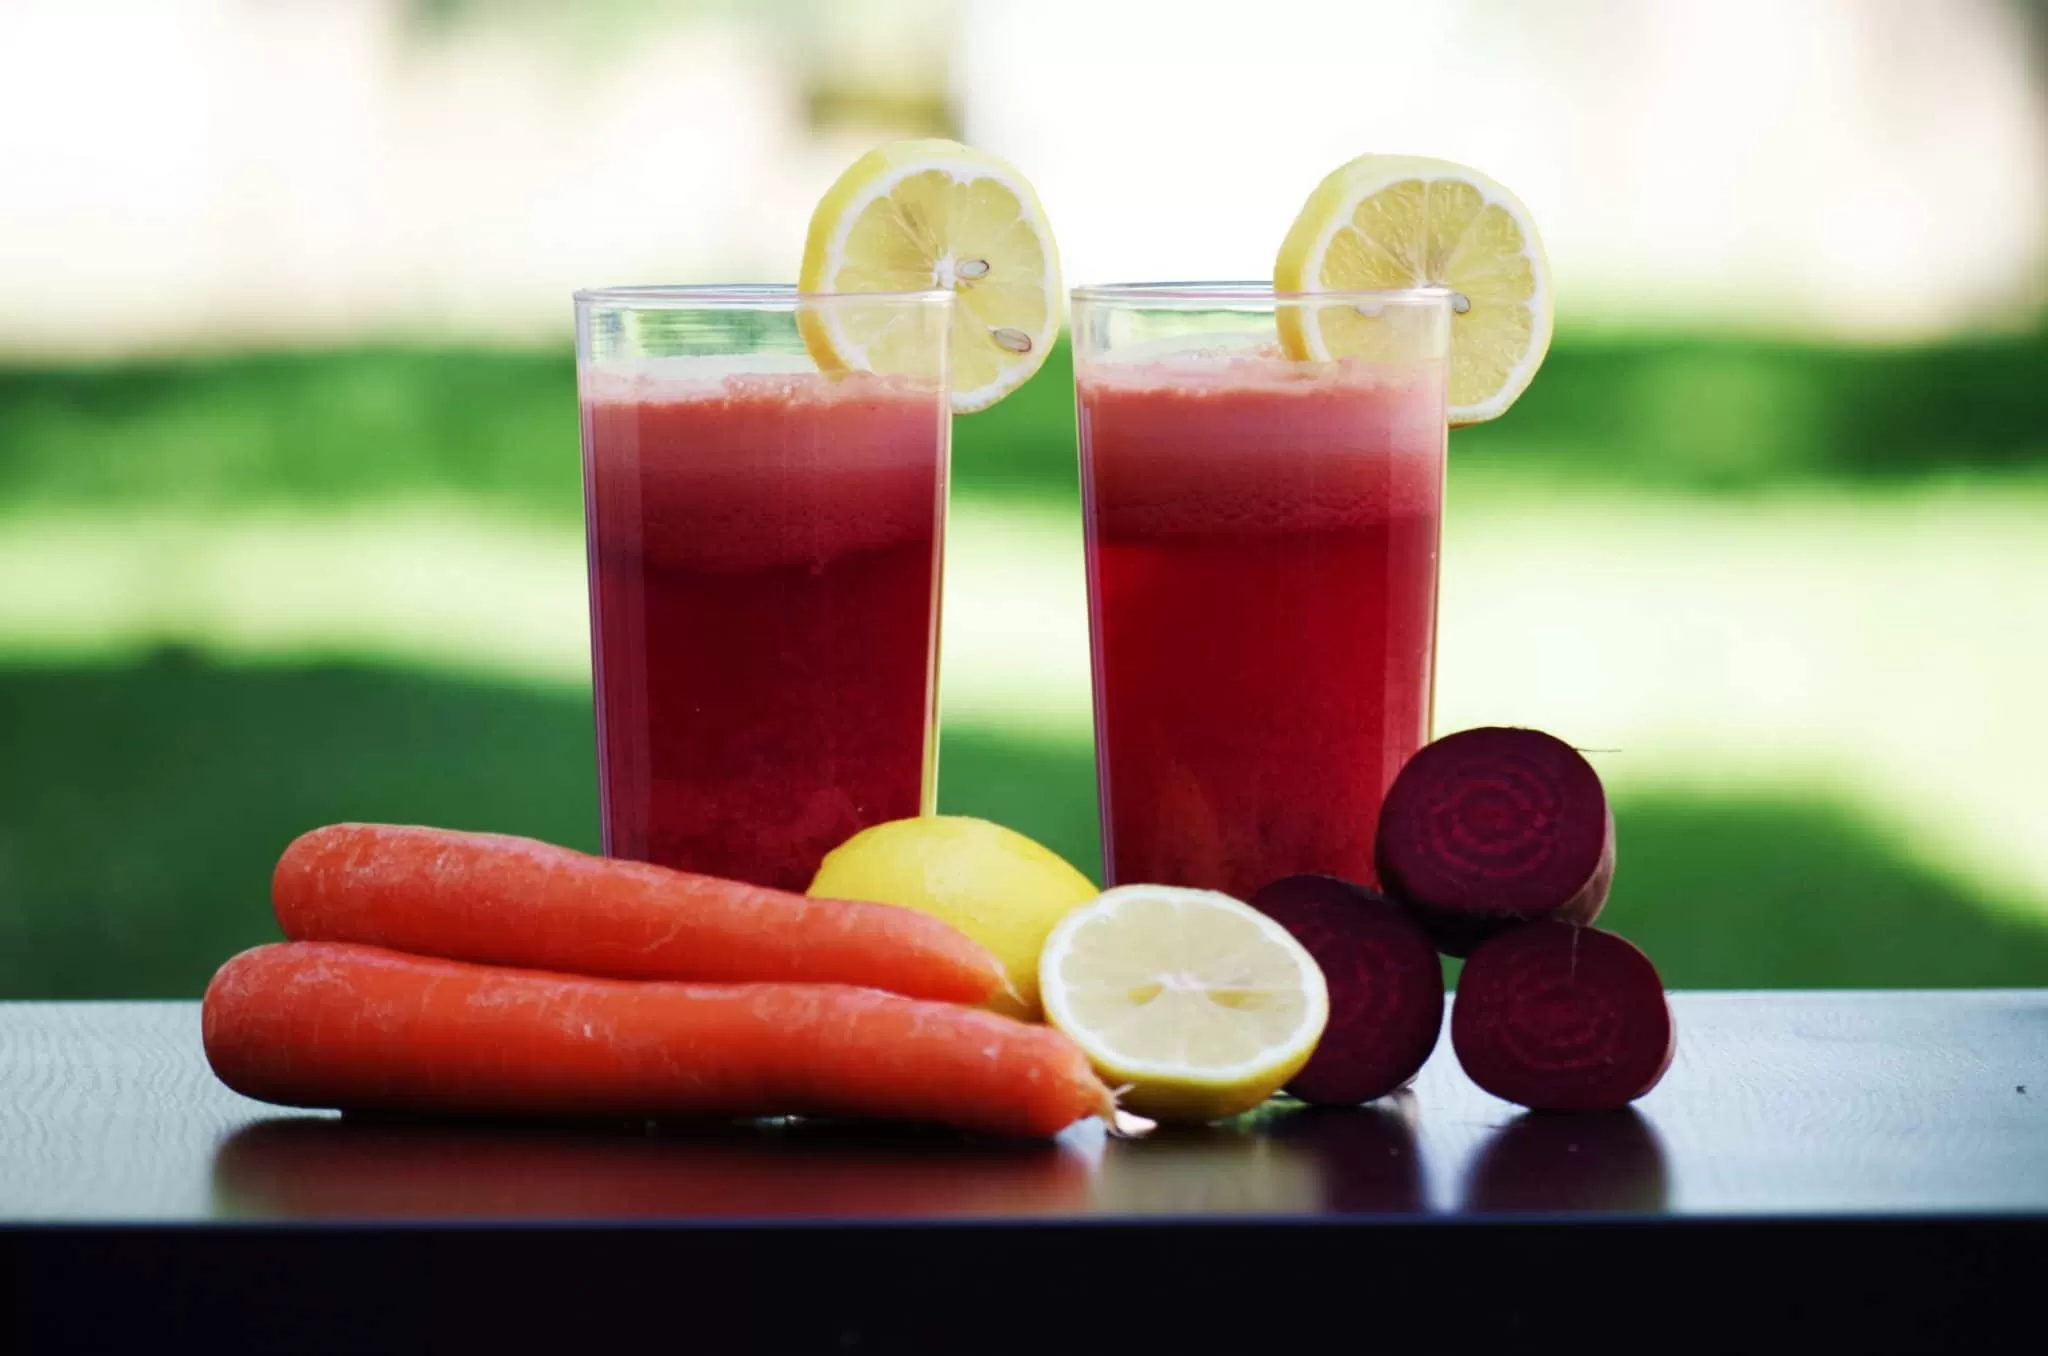 Here’s What Happened When I Swapped My Morning Coffee For Juice